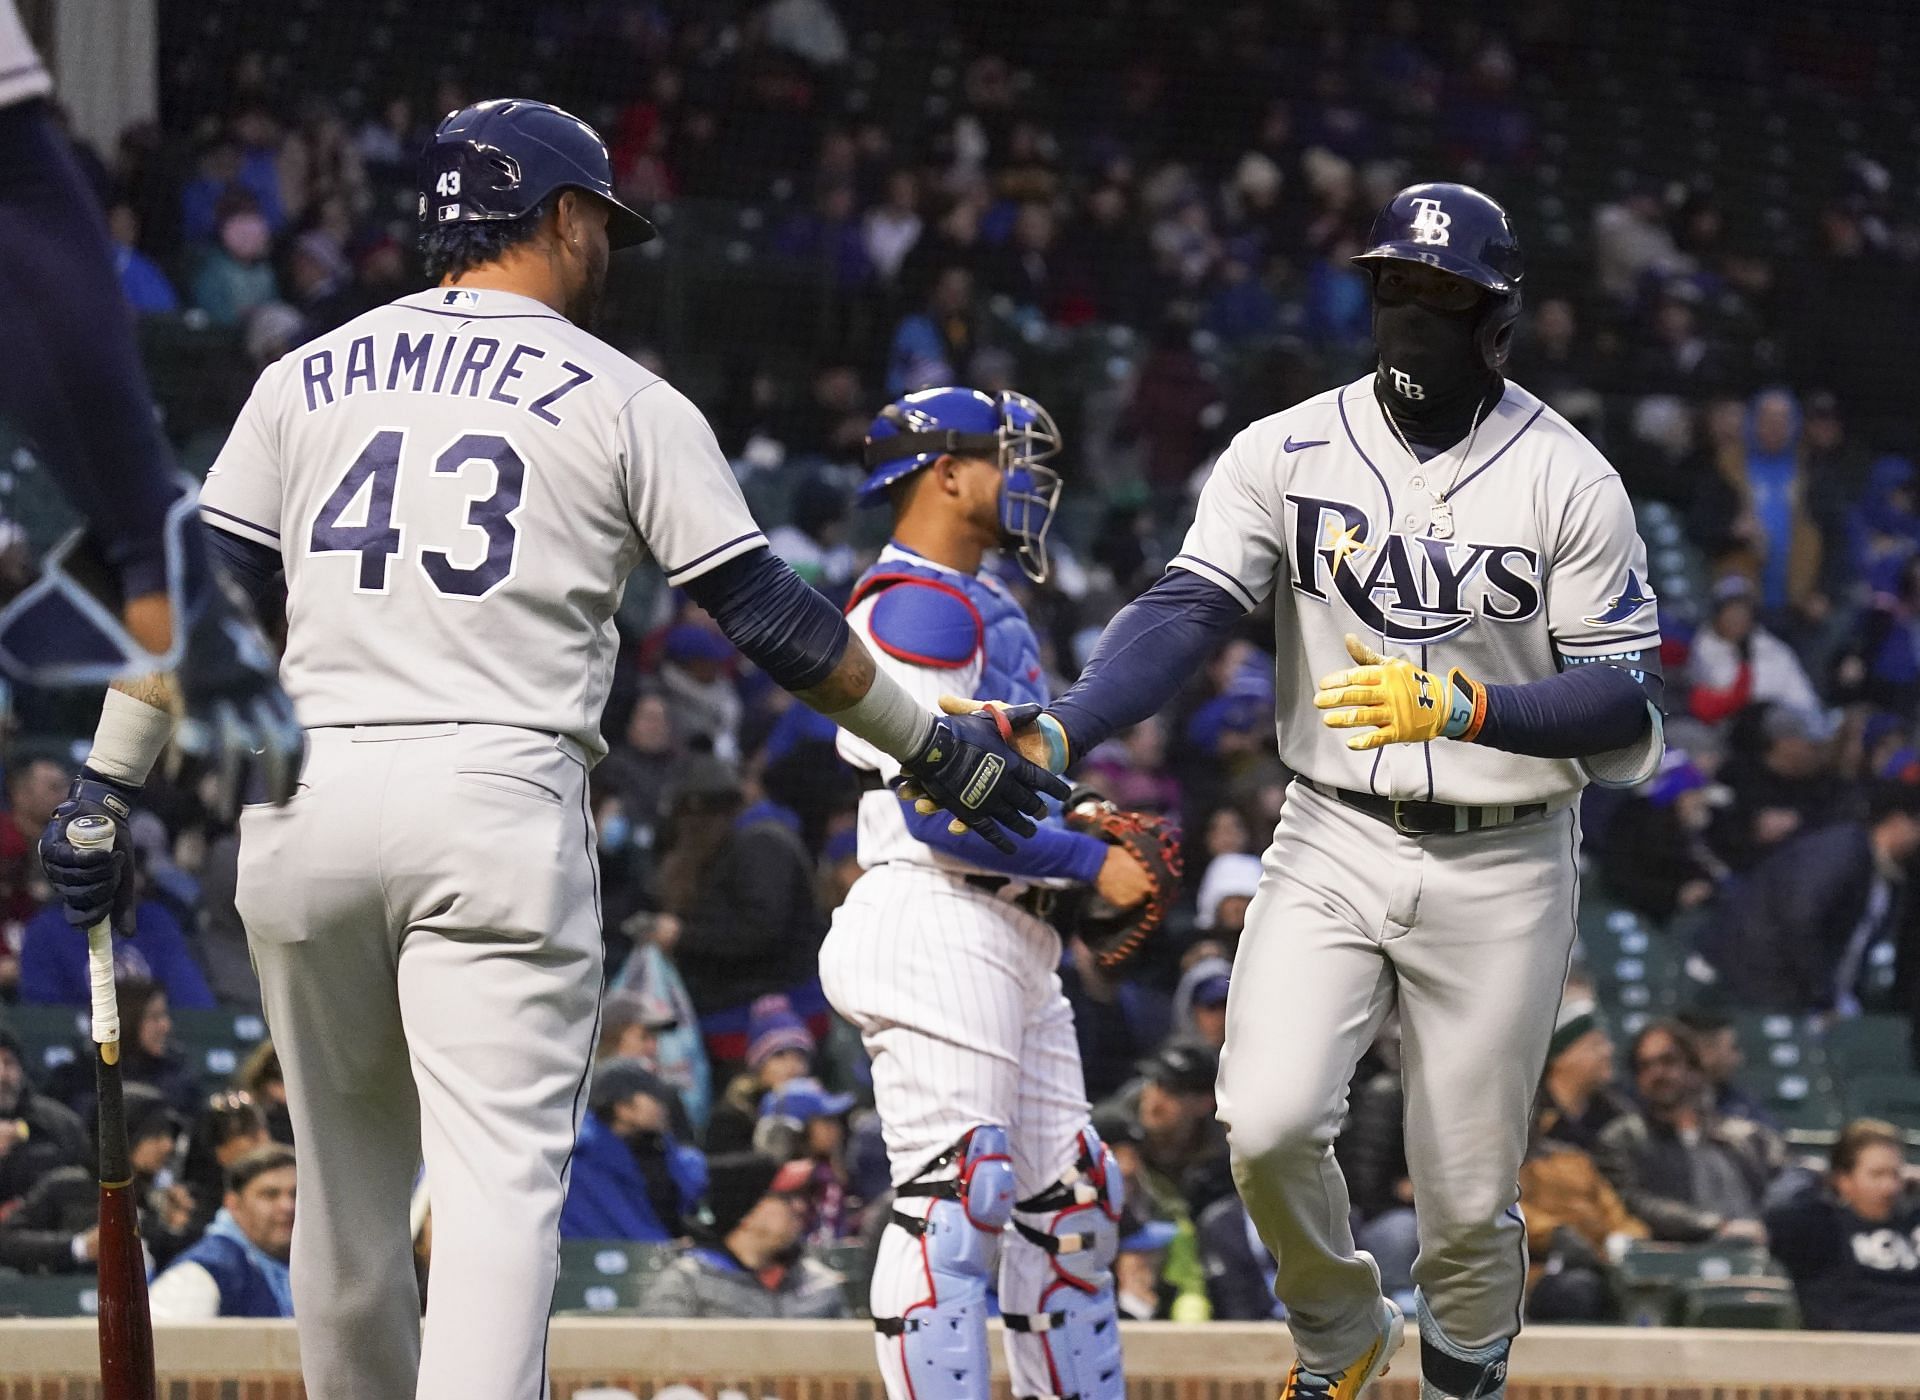 Tampa Bay Rays vs Chicago Cubs Preview, Odds, and Prediction